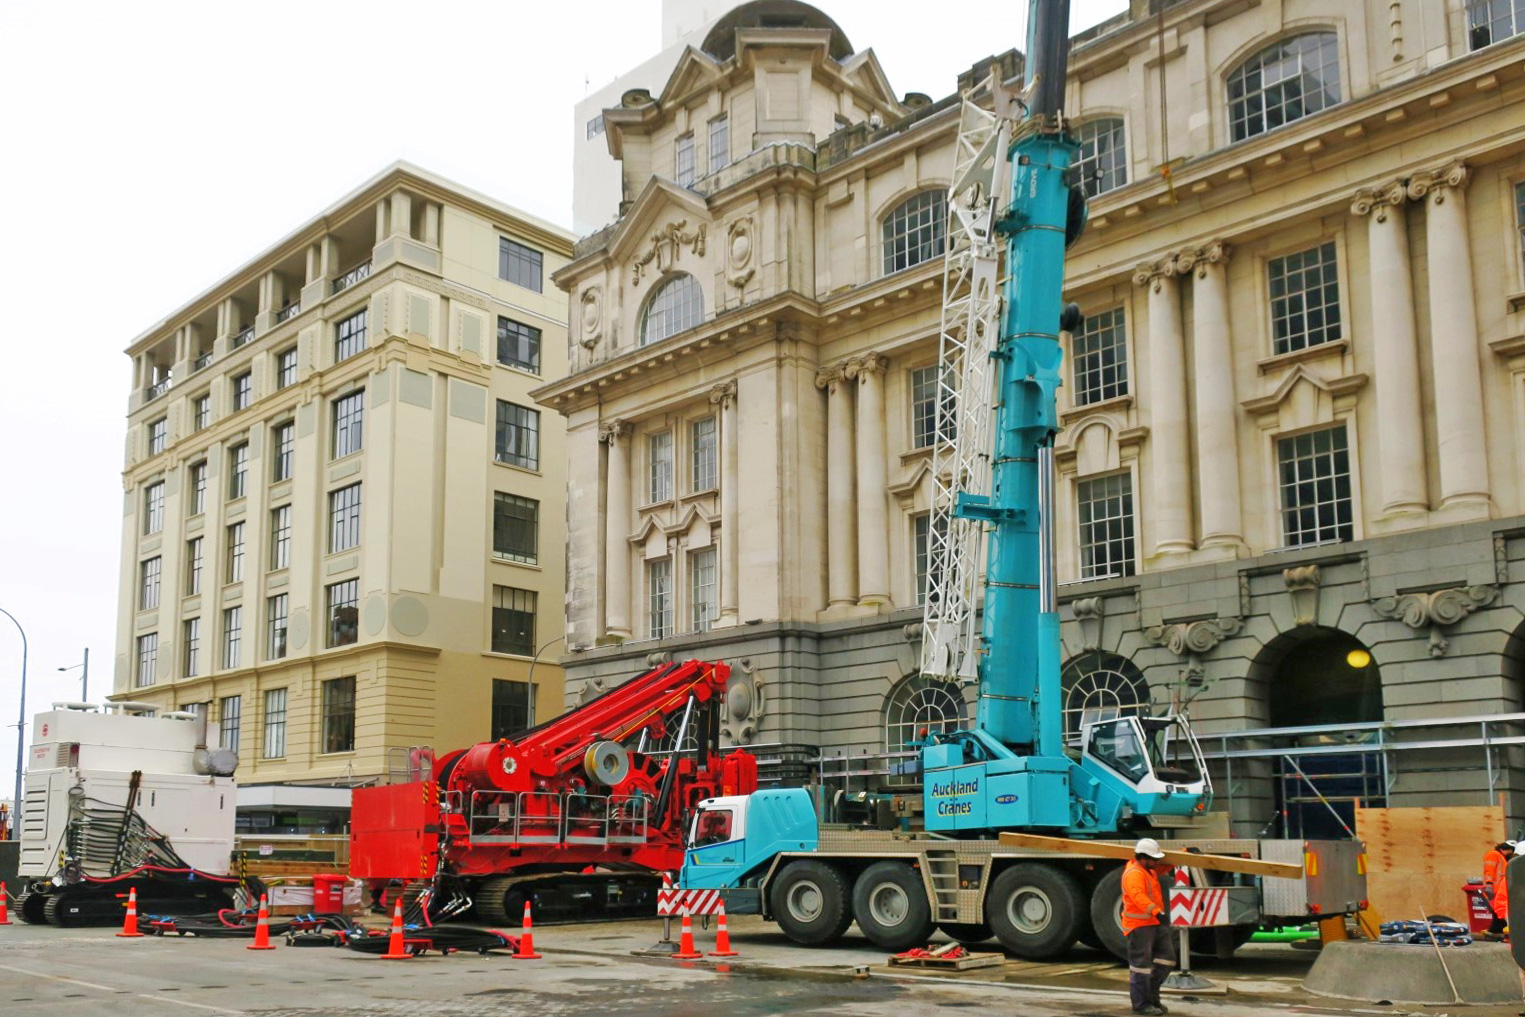  This bright red 90 tonne piling rig named Sandrine worked inside and outside the historic Chief Post Office (Britomart Transport Centre) building until being returned to France in early 2018. This was taken in August 2017. 